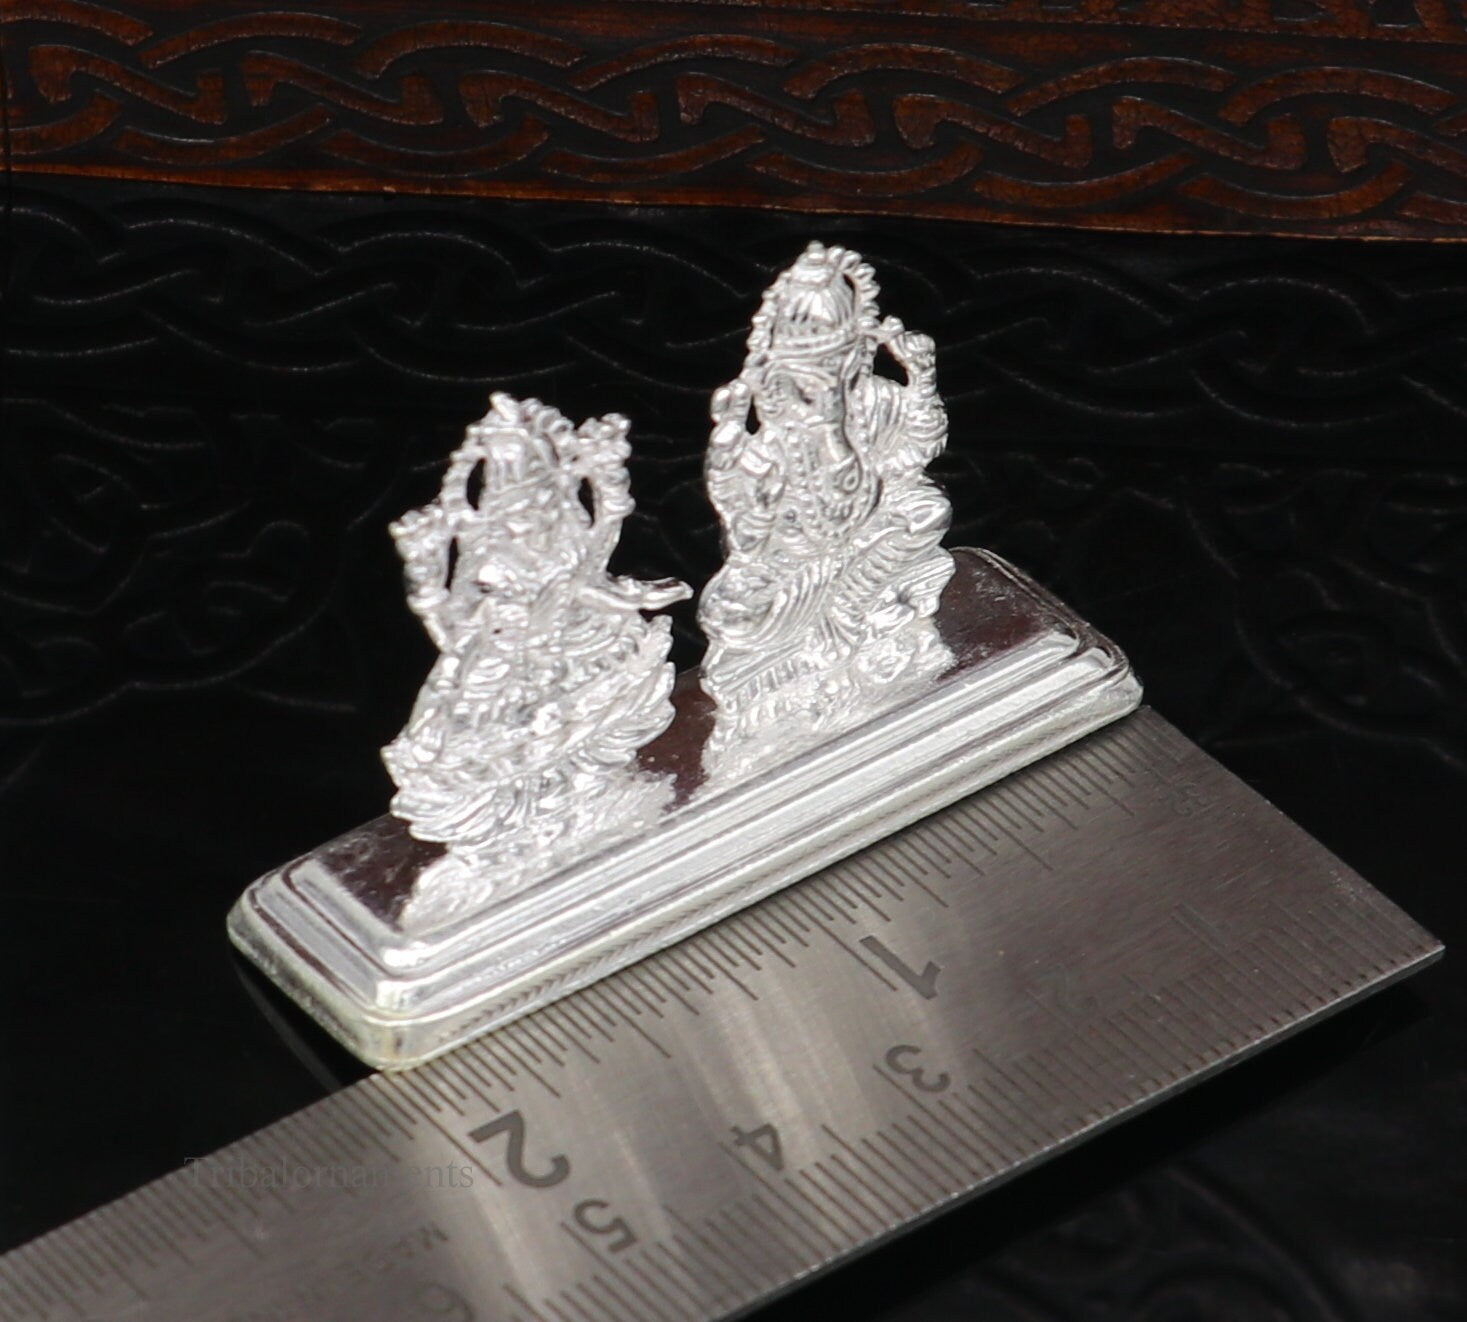 Solid Sterling silver handmade customized Hindu idols Laxmi and Ganesha statue, puja article figurine, home décor puja Articles india art47 - TRIBAL ORNAMENTS